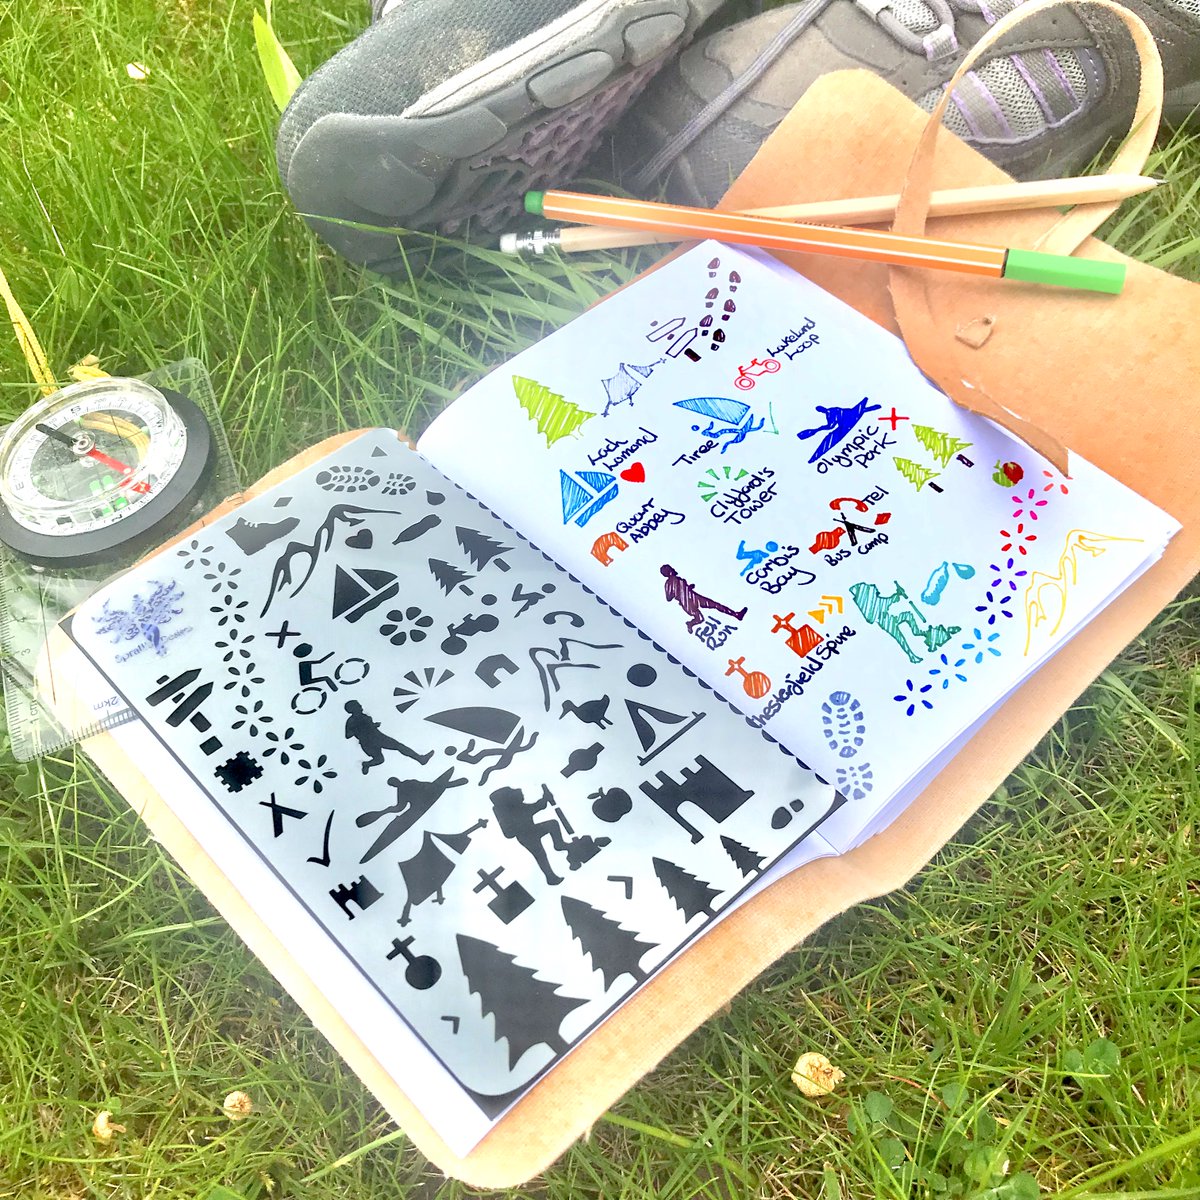 The Adventure Stencil & Journal Set is great as a #ChristmasGift or #StockingFiller let them record or plan their future adventures in full colour this #Christmas bit.ly/EtsyBJAdventure
#SprattDesigns #UKGiftAM #JournalBasics #LearnToJournal #StationeryAddict